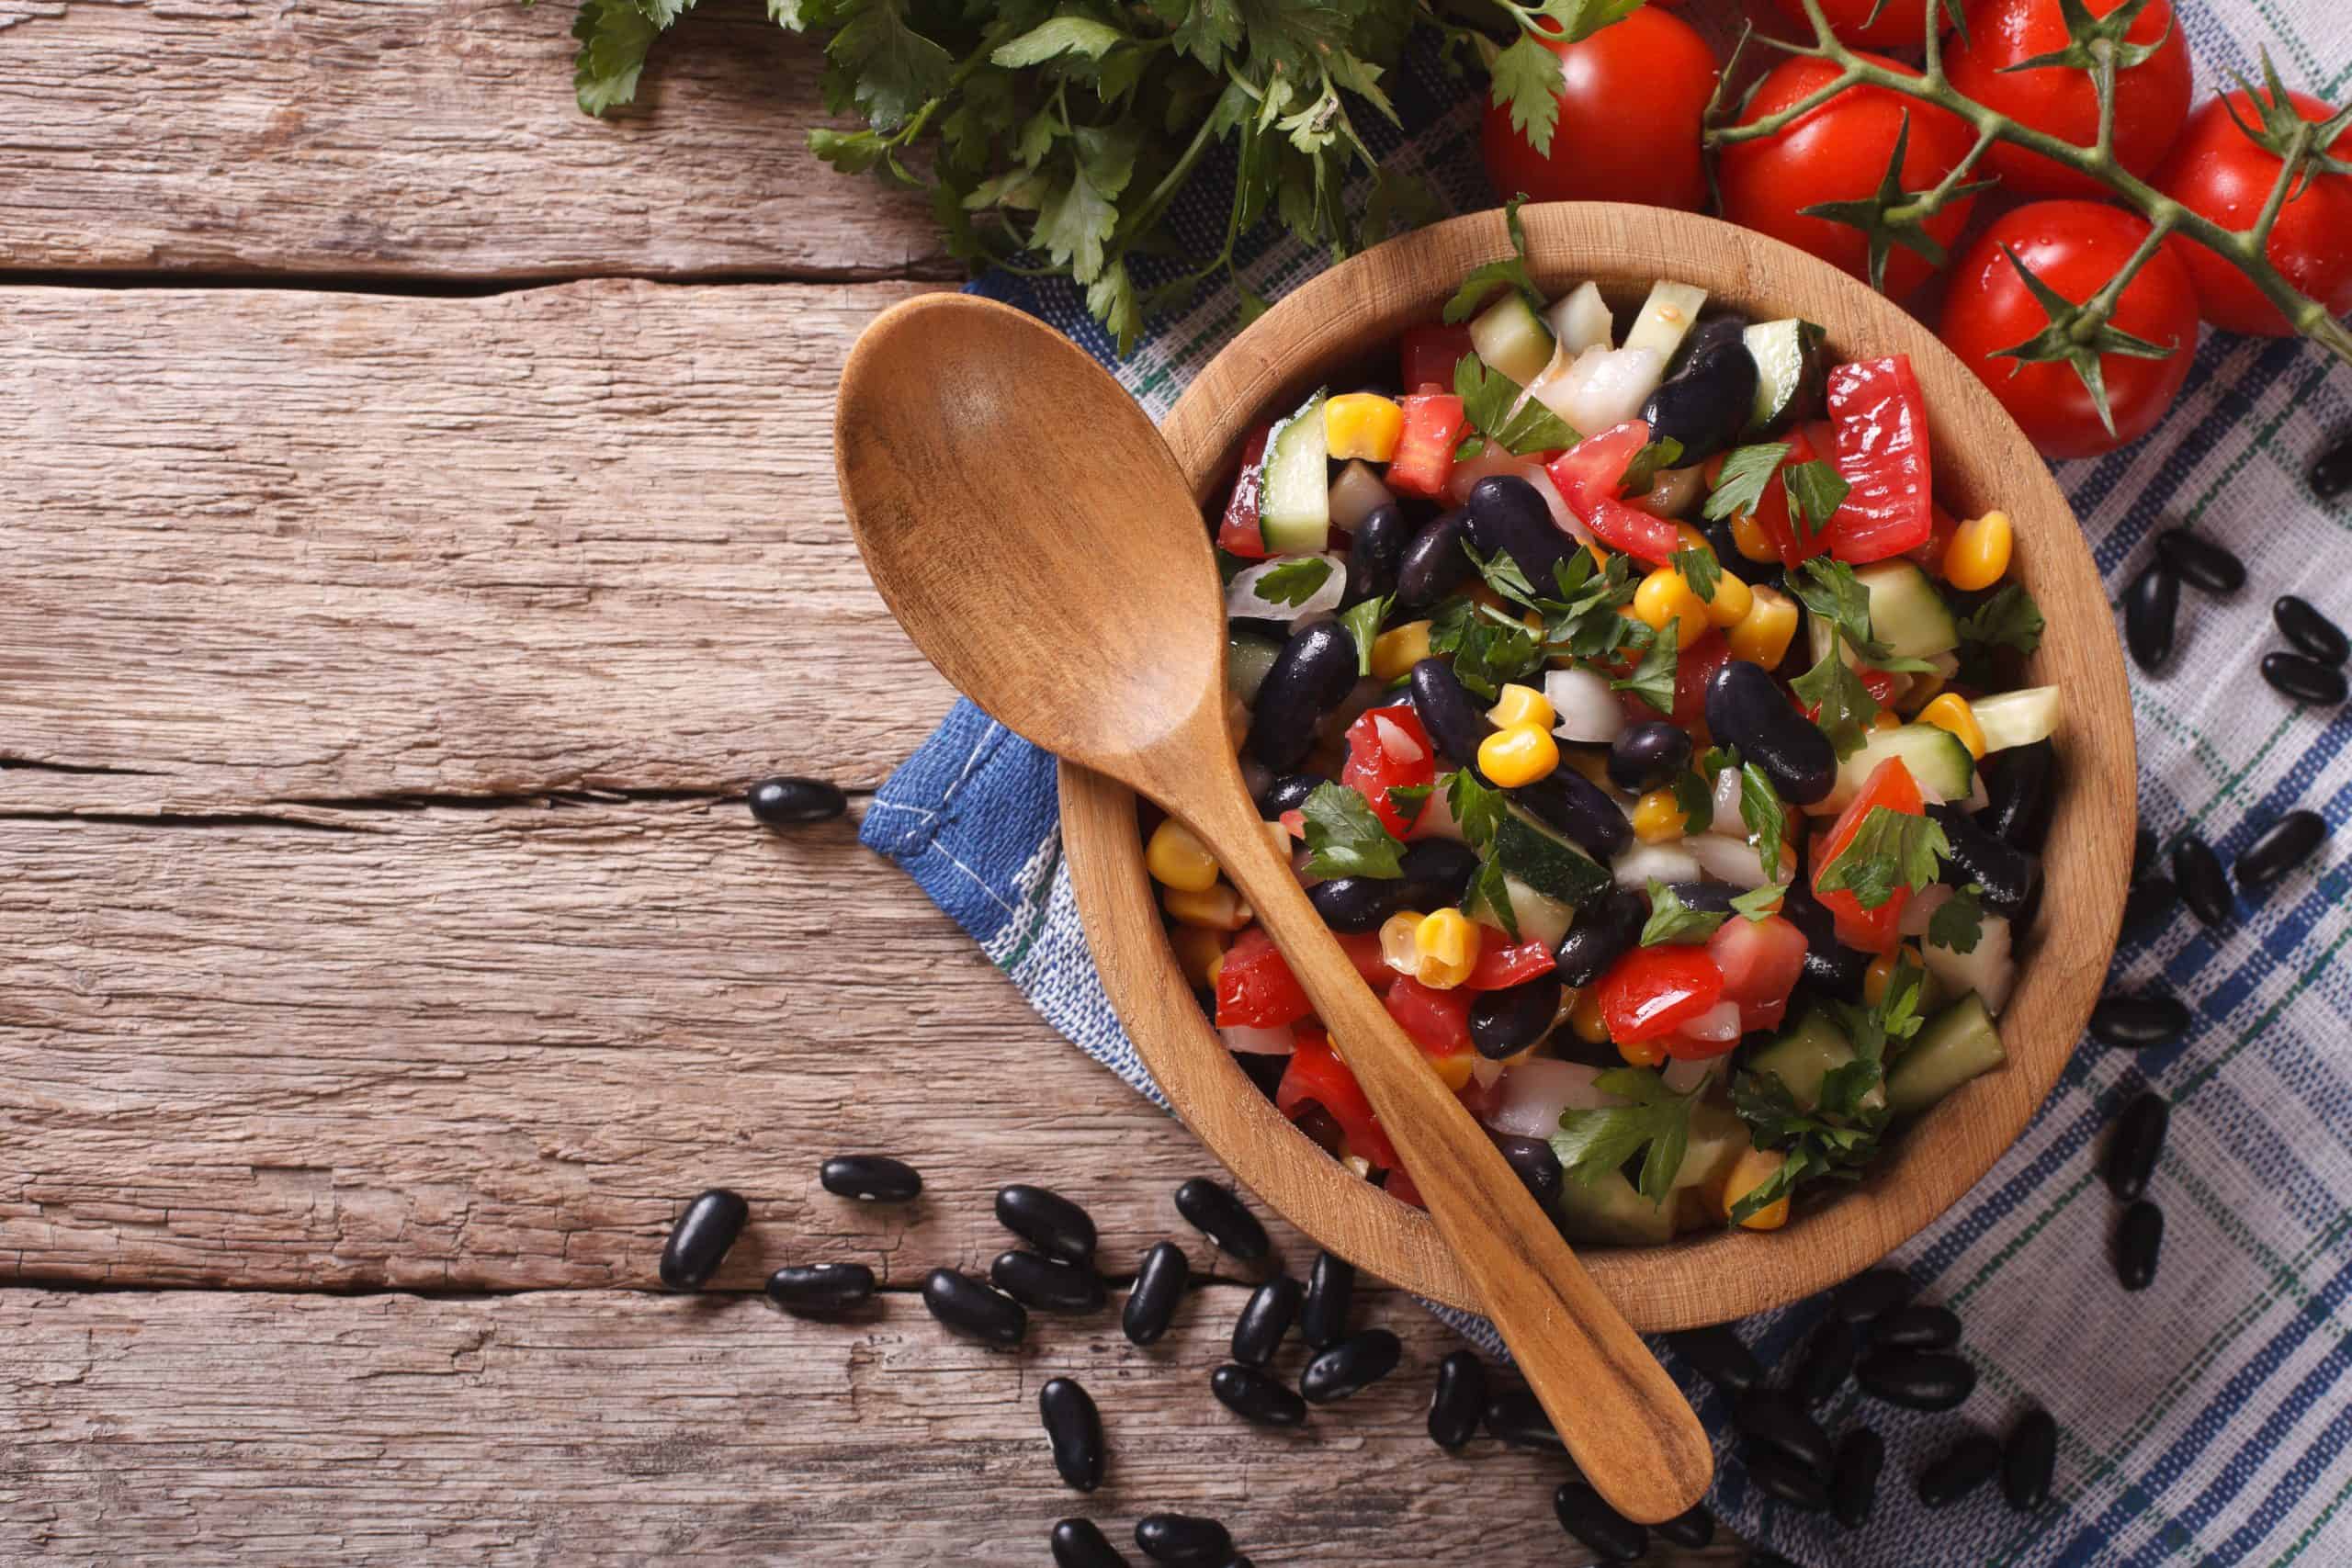 Salad with greens, black beans, corn and tomatoes in a wooden bowl with wooden spoon 